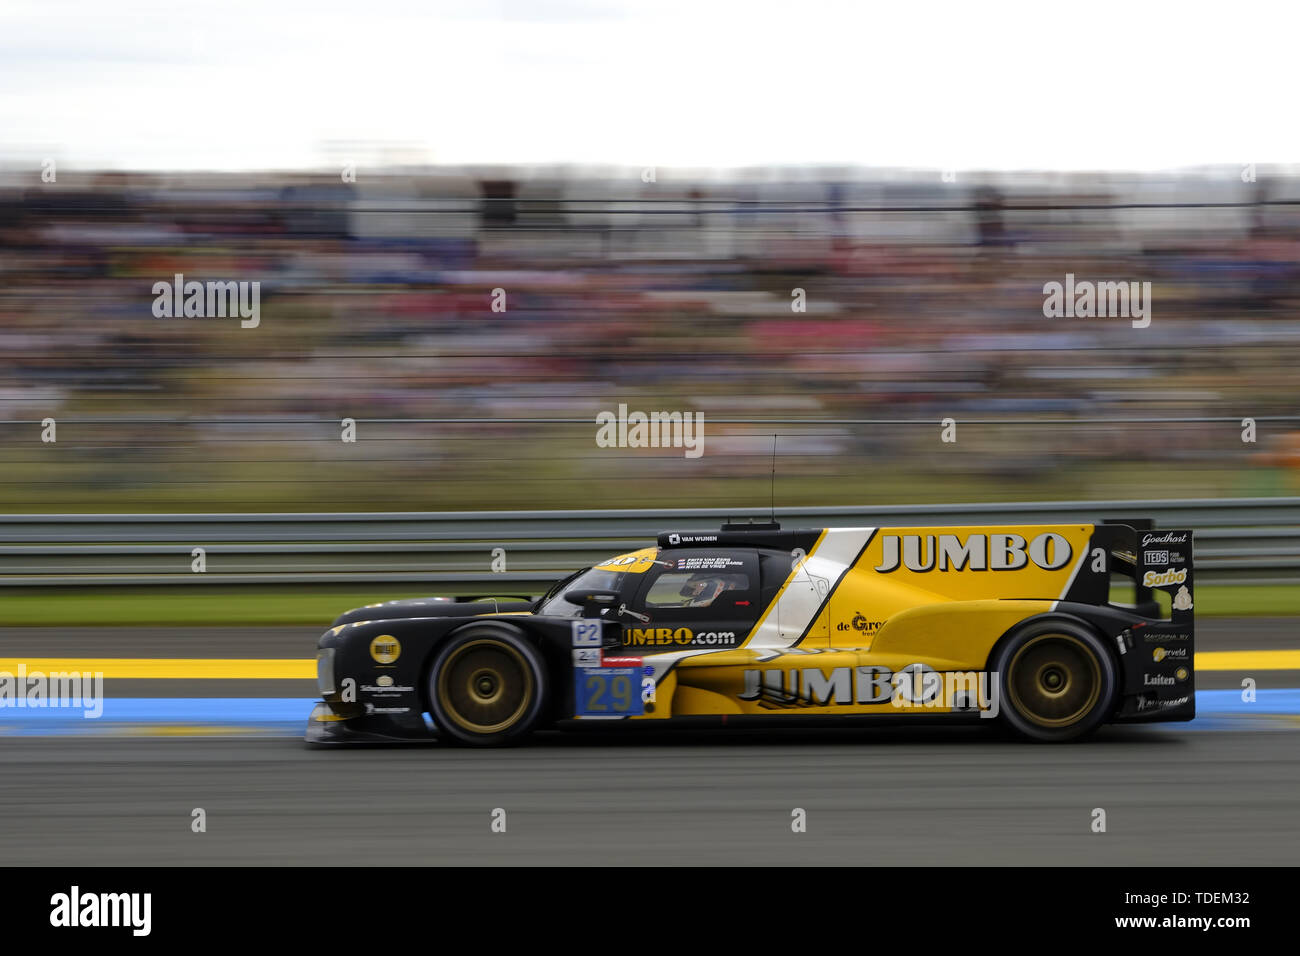 Le Mans, Sarthe, France. 15th June, 2019. Racing Team Nederland DALLARA P217 Gibson rider NYCK DE VRIES (NLD) in action during the 87th edition of the 24 hours of Le Mans the last round of the FIA World Endurance Championship at the Sarthe circuit at Le Mans - France Credit: Pierre Stevenin/ZUMA Wire/Alamy Live News Stock Photo